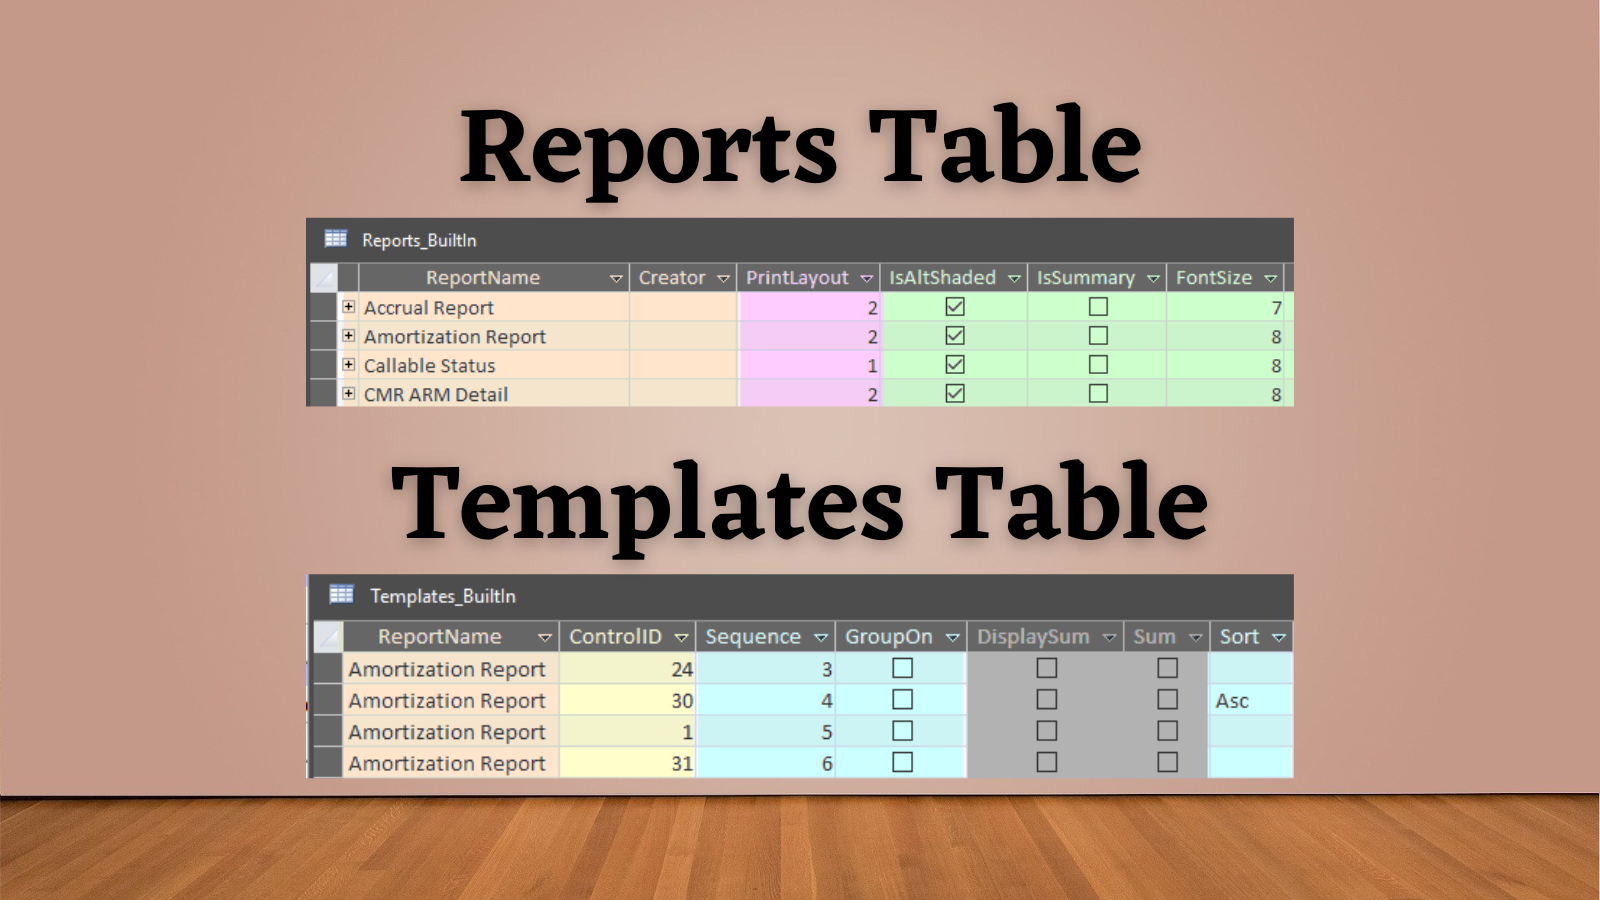 Report Builder: The Reports & Templates Tables